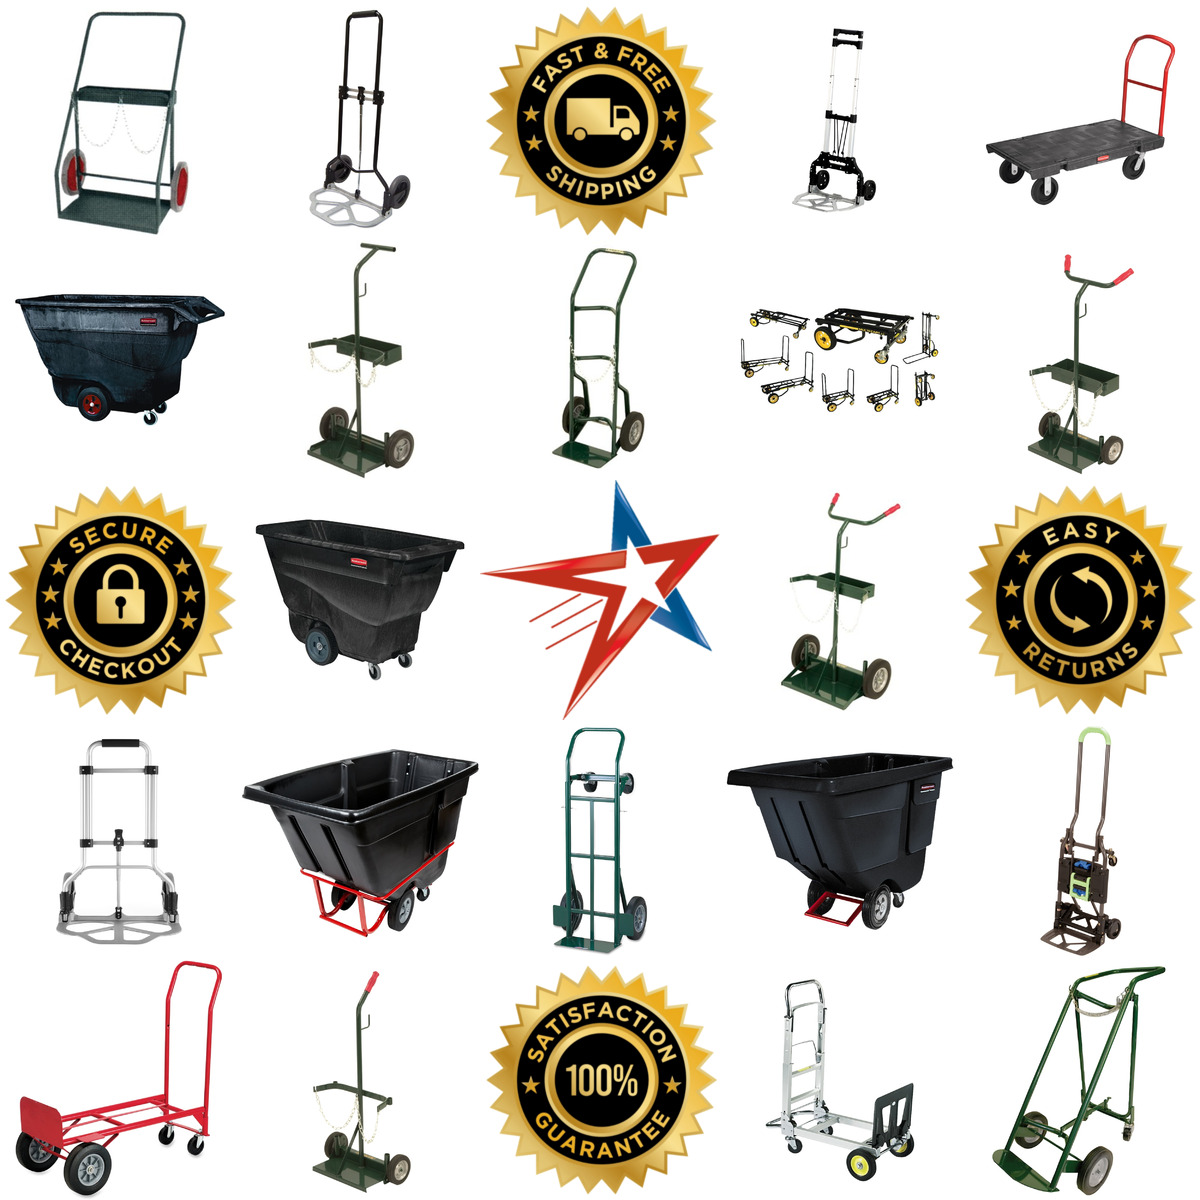 A selection of Carts and Trucks products on GoVets